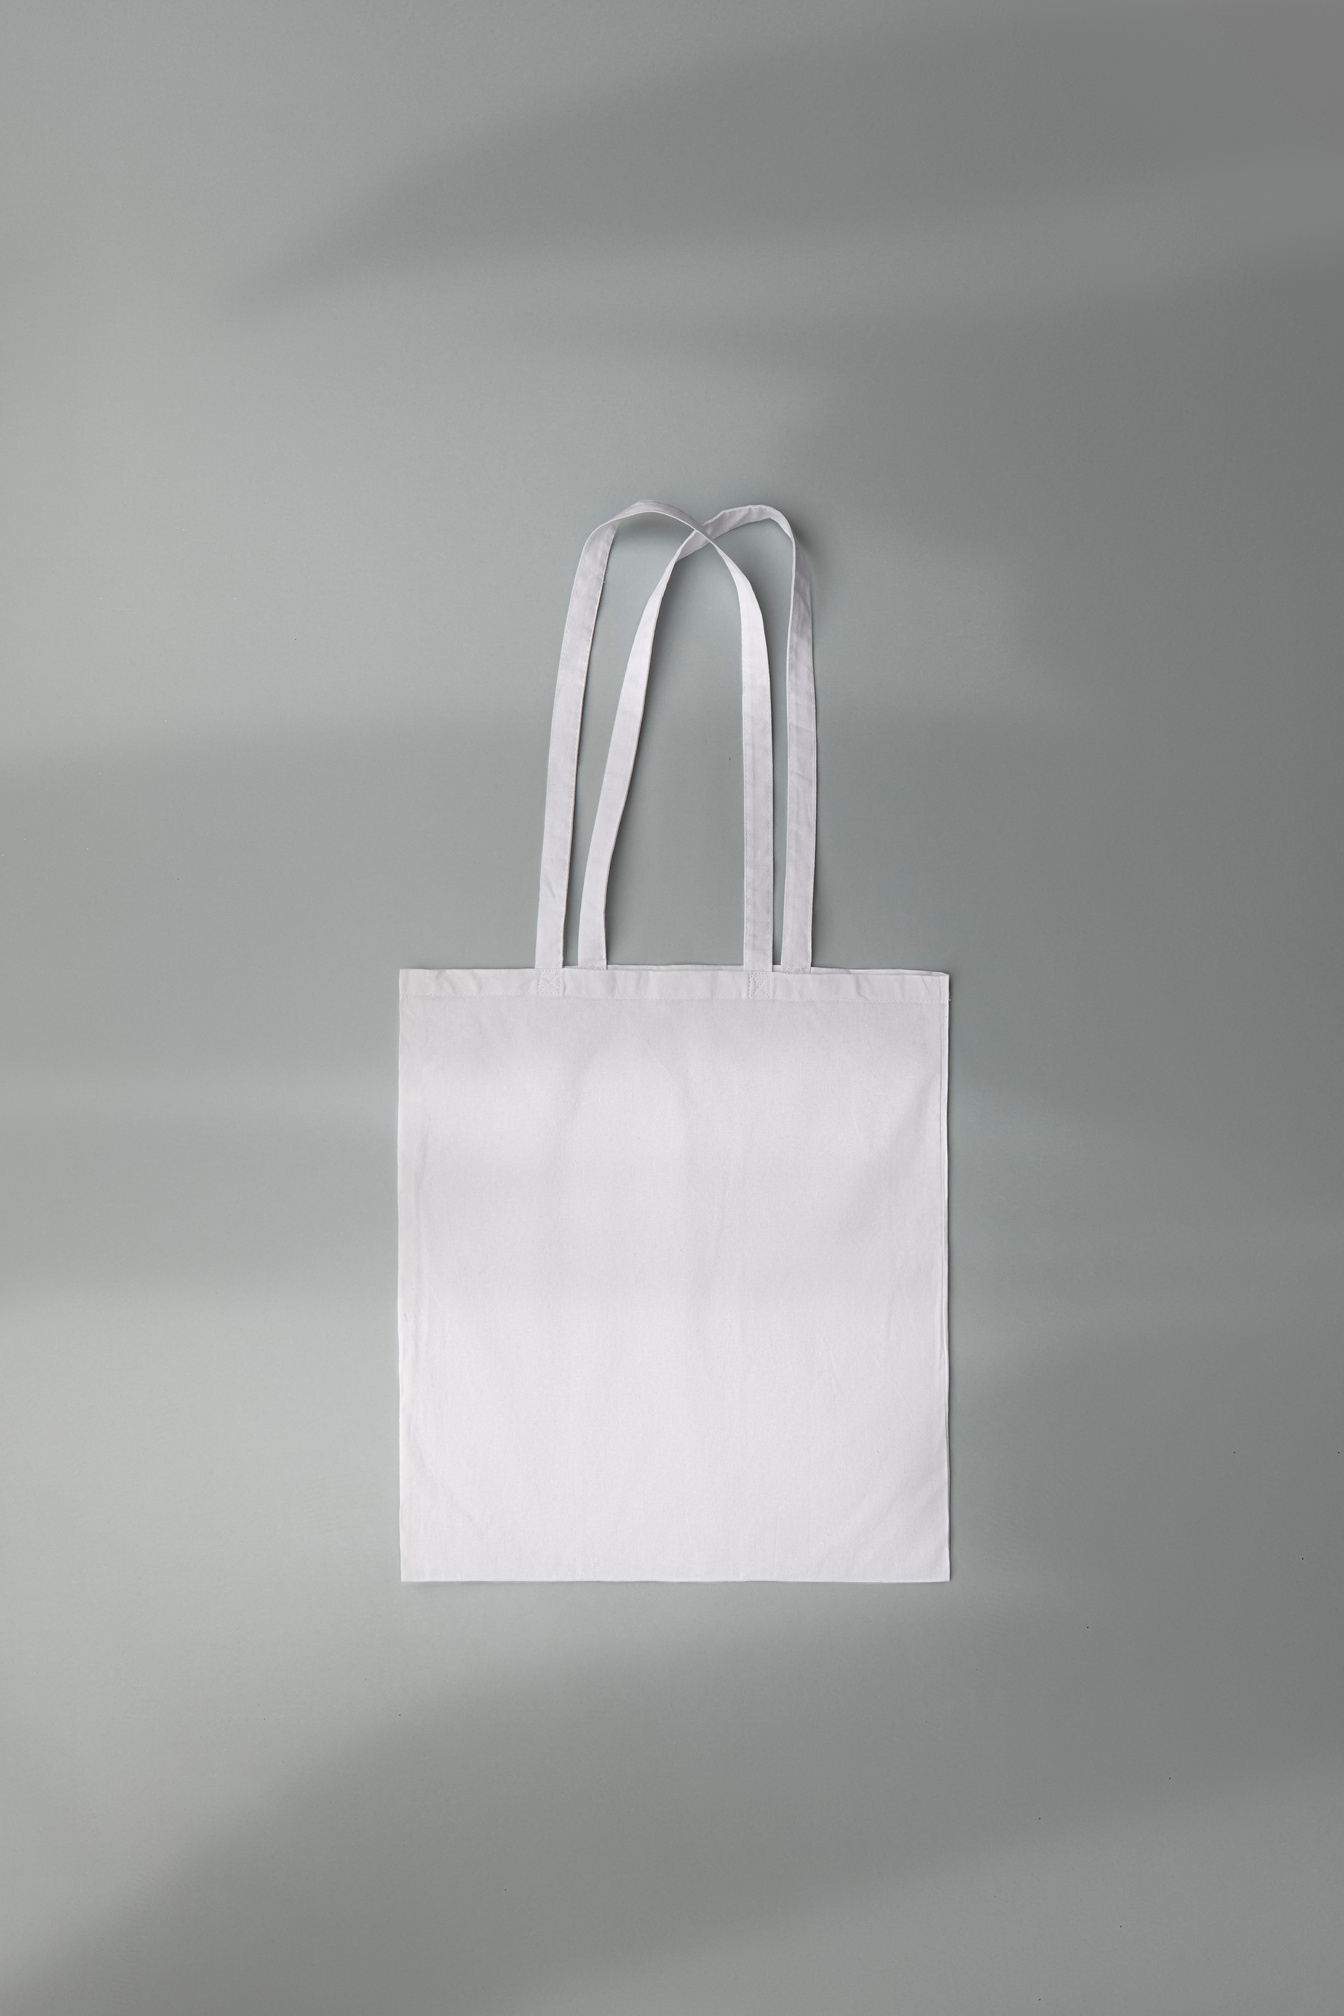 White Tote Bag on Grey Background